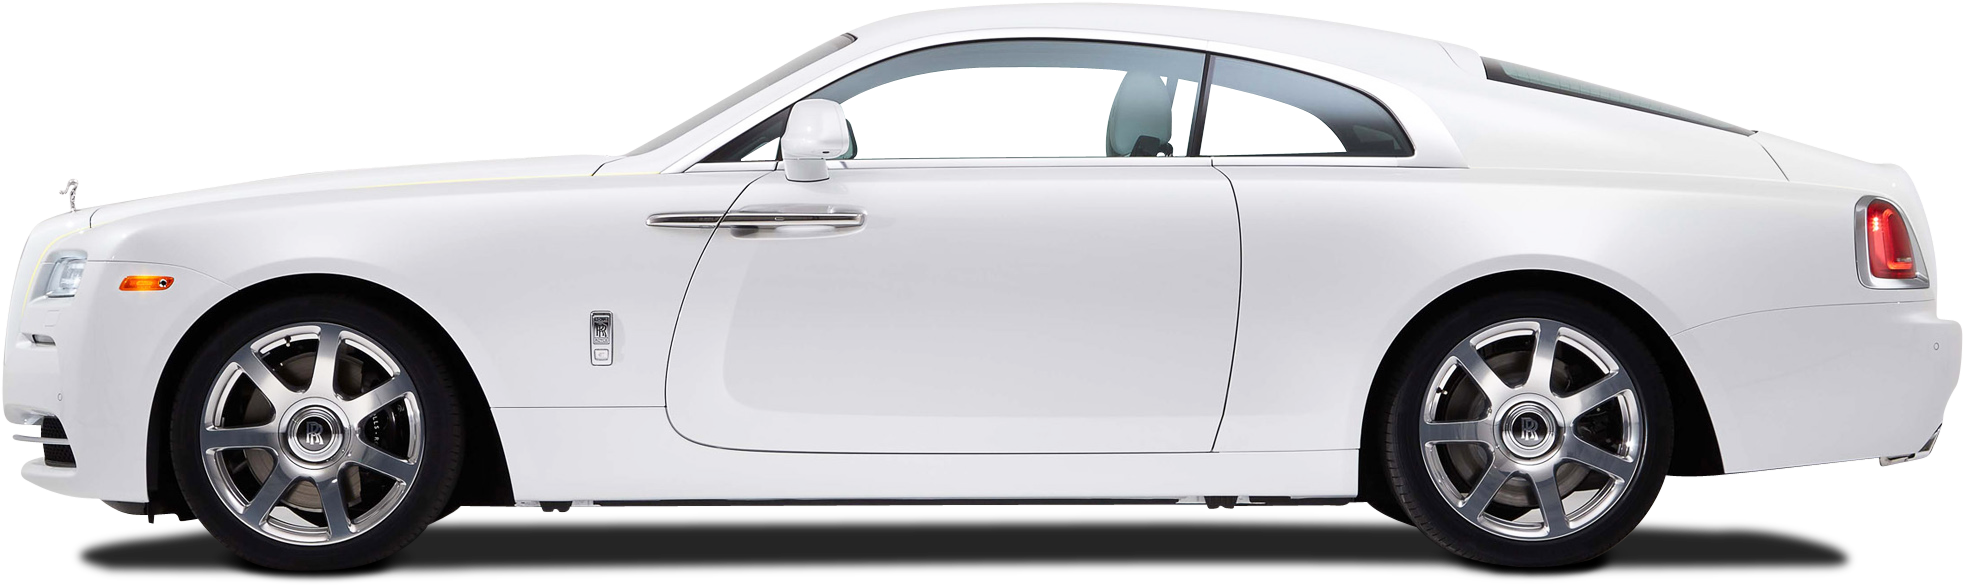 White Rolls Royce Wraith Car Png Image - Rolls Royce Wraith Png (2029x677), Png Download